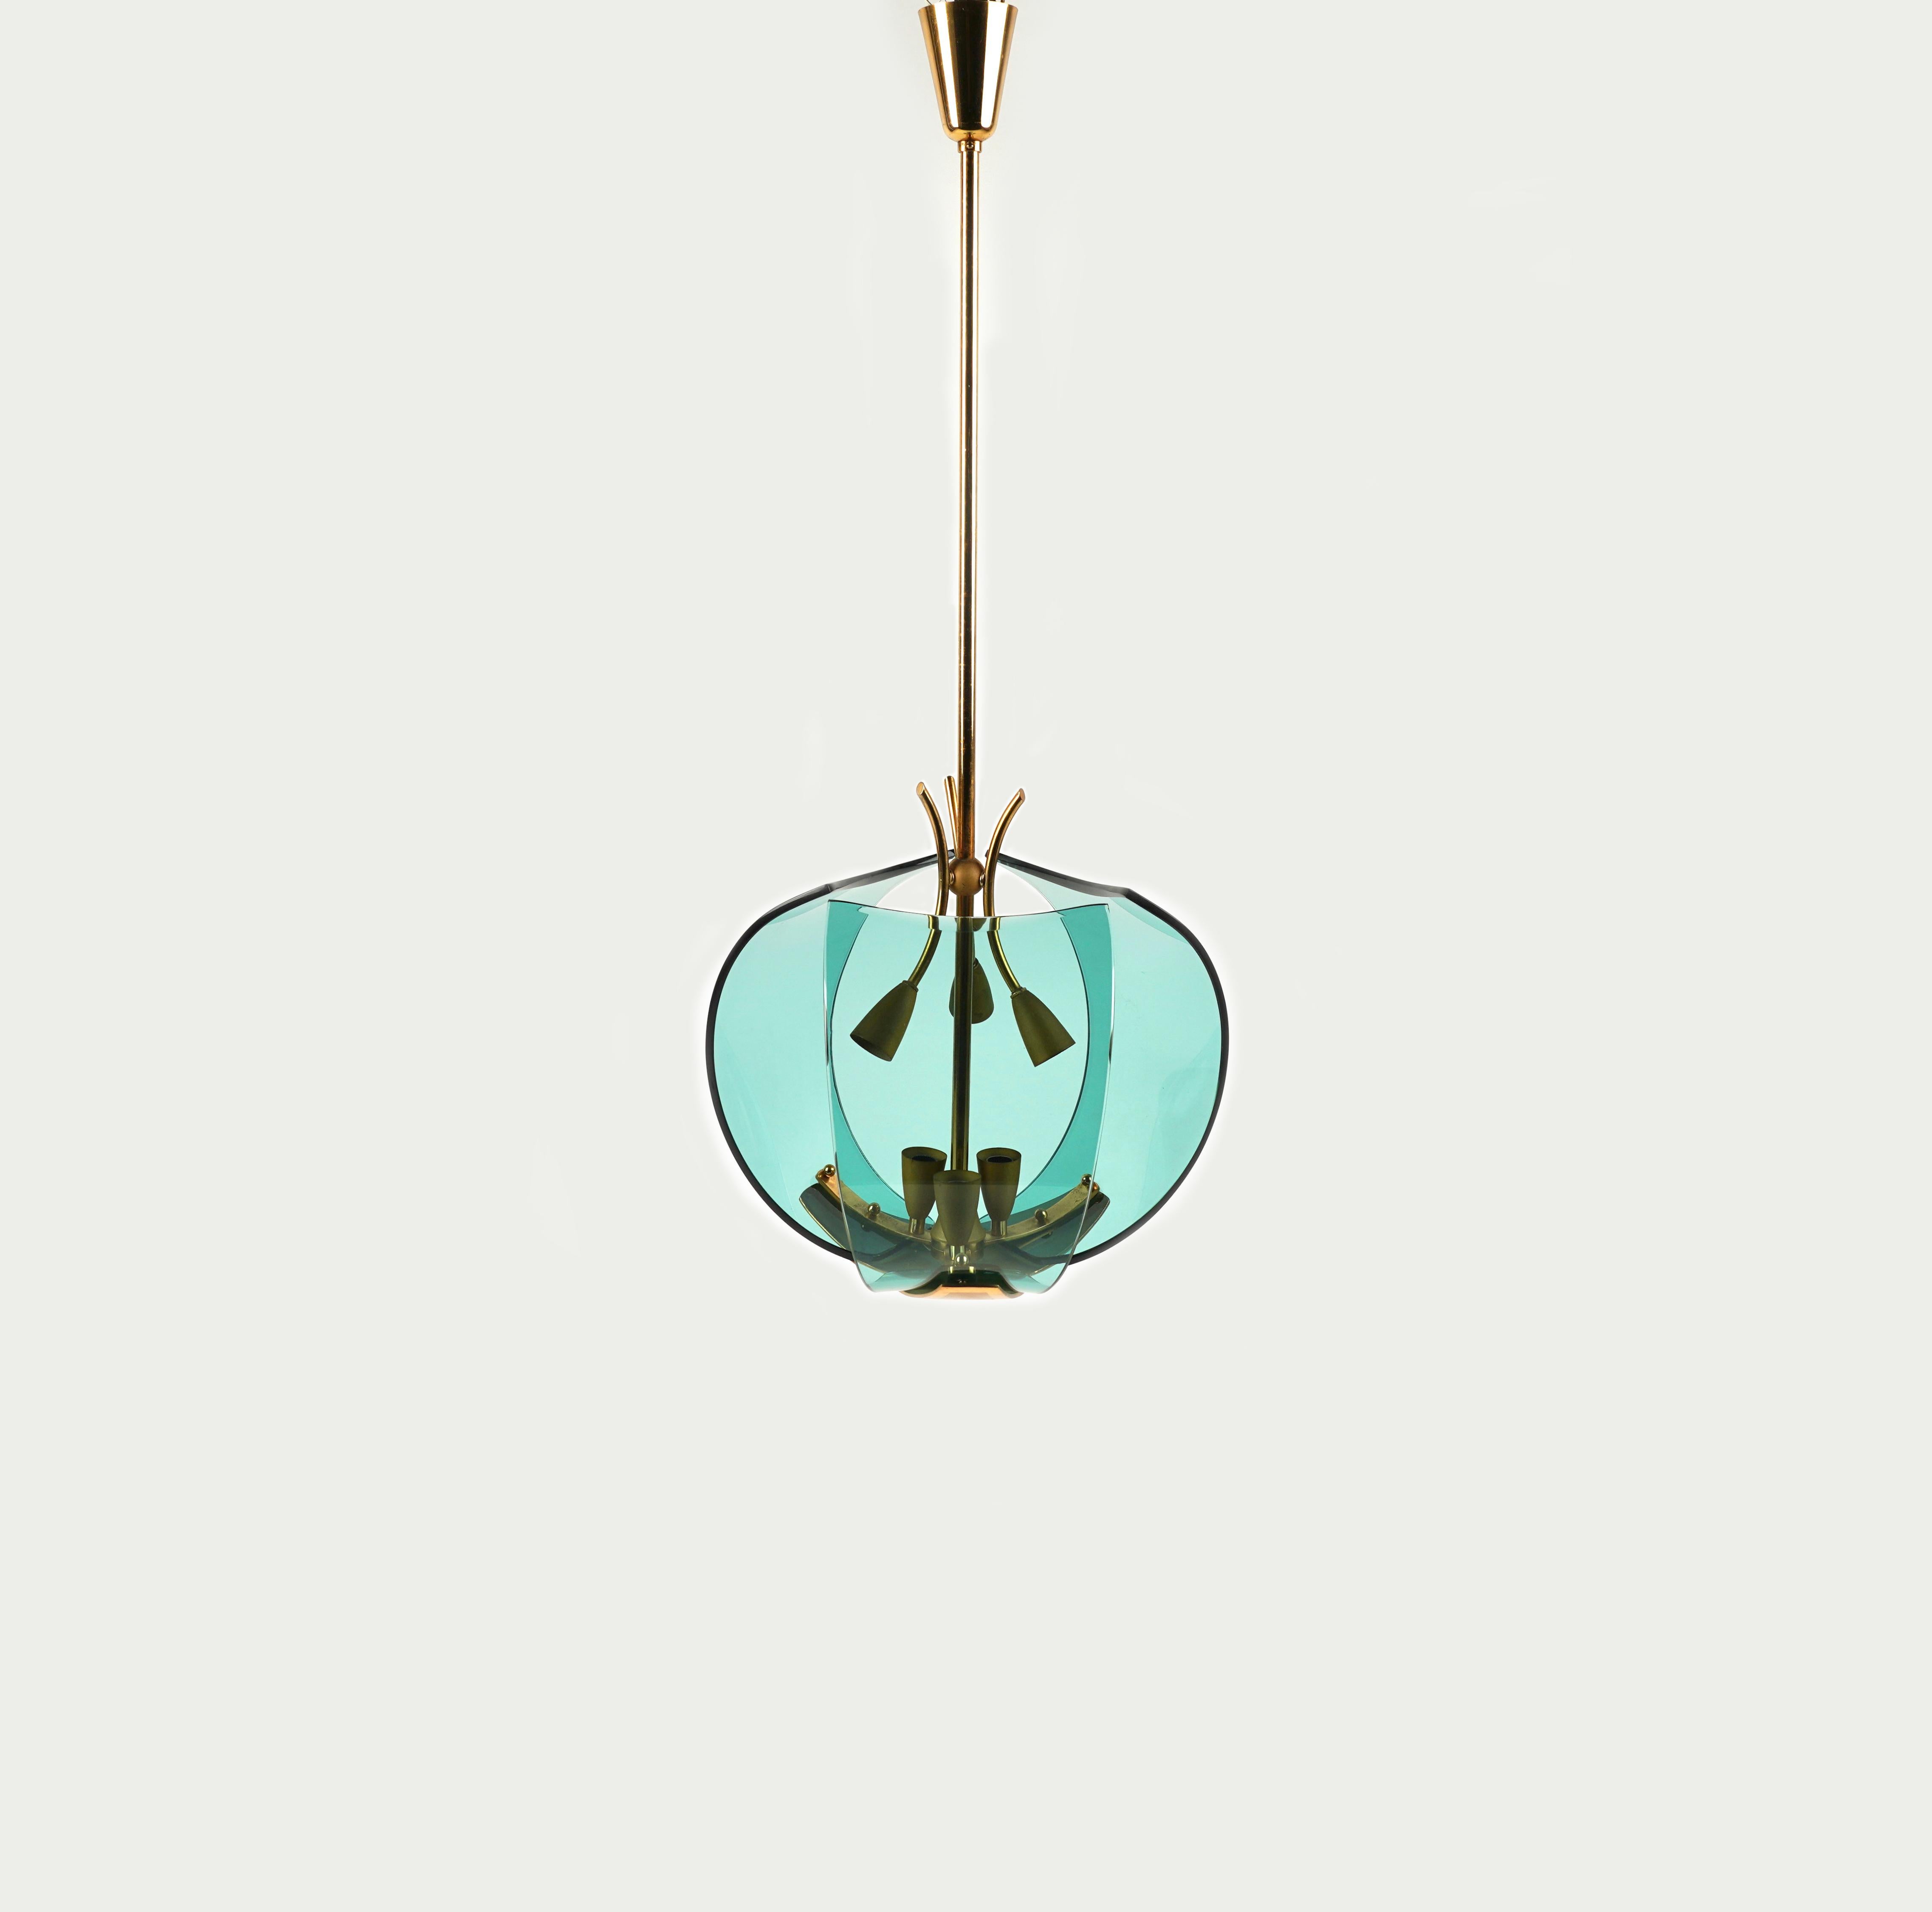 Metal Midcentury Chandelier in Brass and Glass by Fontana Arte, Italy, 1950s For Sale